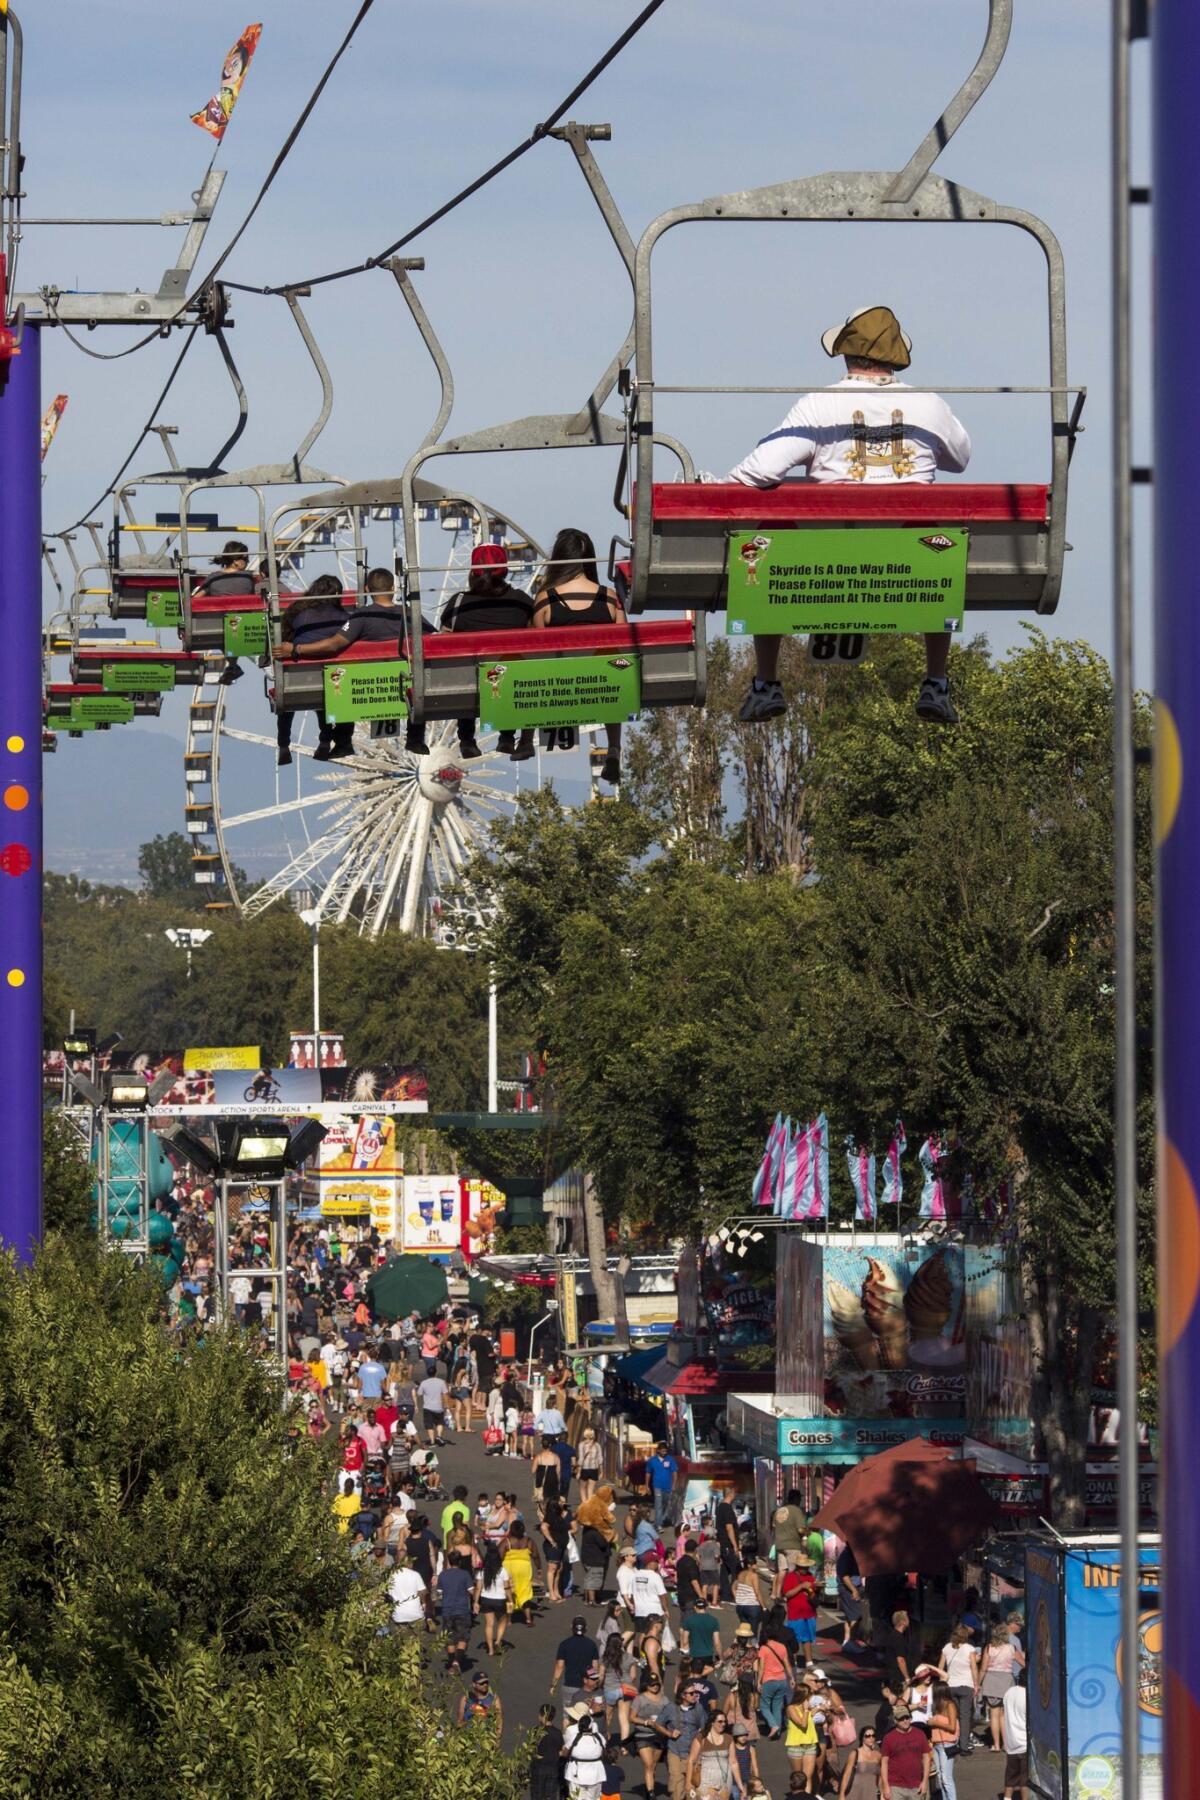 Patrons watch from a ski lift ride as fairgoers enjoy entertainment, rides, games, animals and deep-fried splendor on the first day of the Orange County Fair in 2014. For the 2015 celebration of the fair's 125th anniversary, a series of "pop-up" parties will be held leading up to the fair's opening.